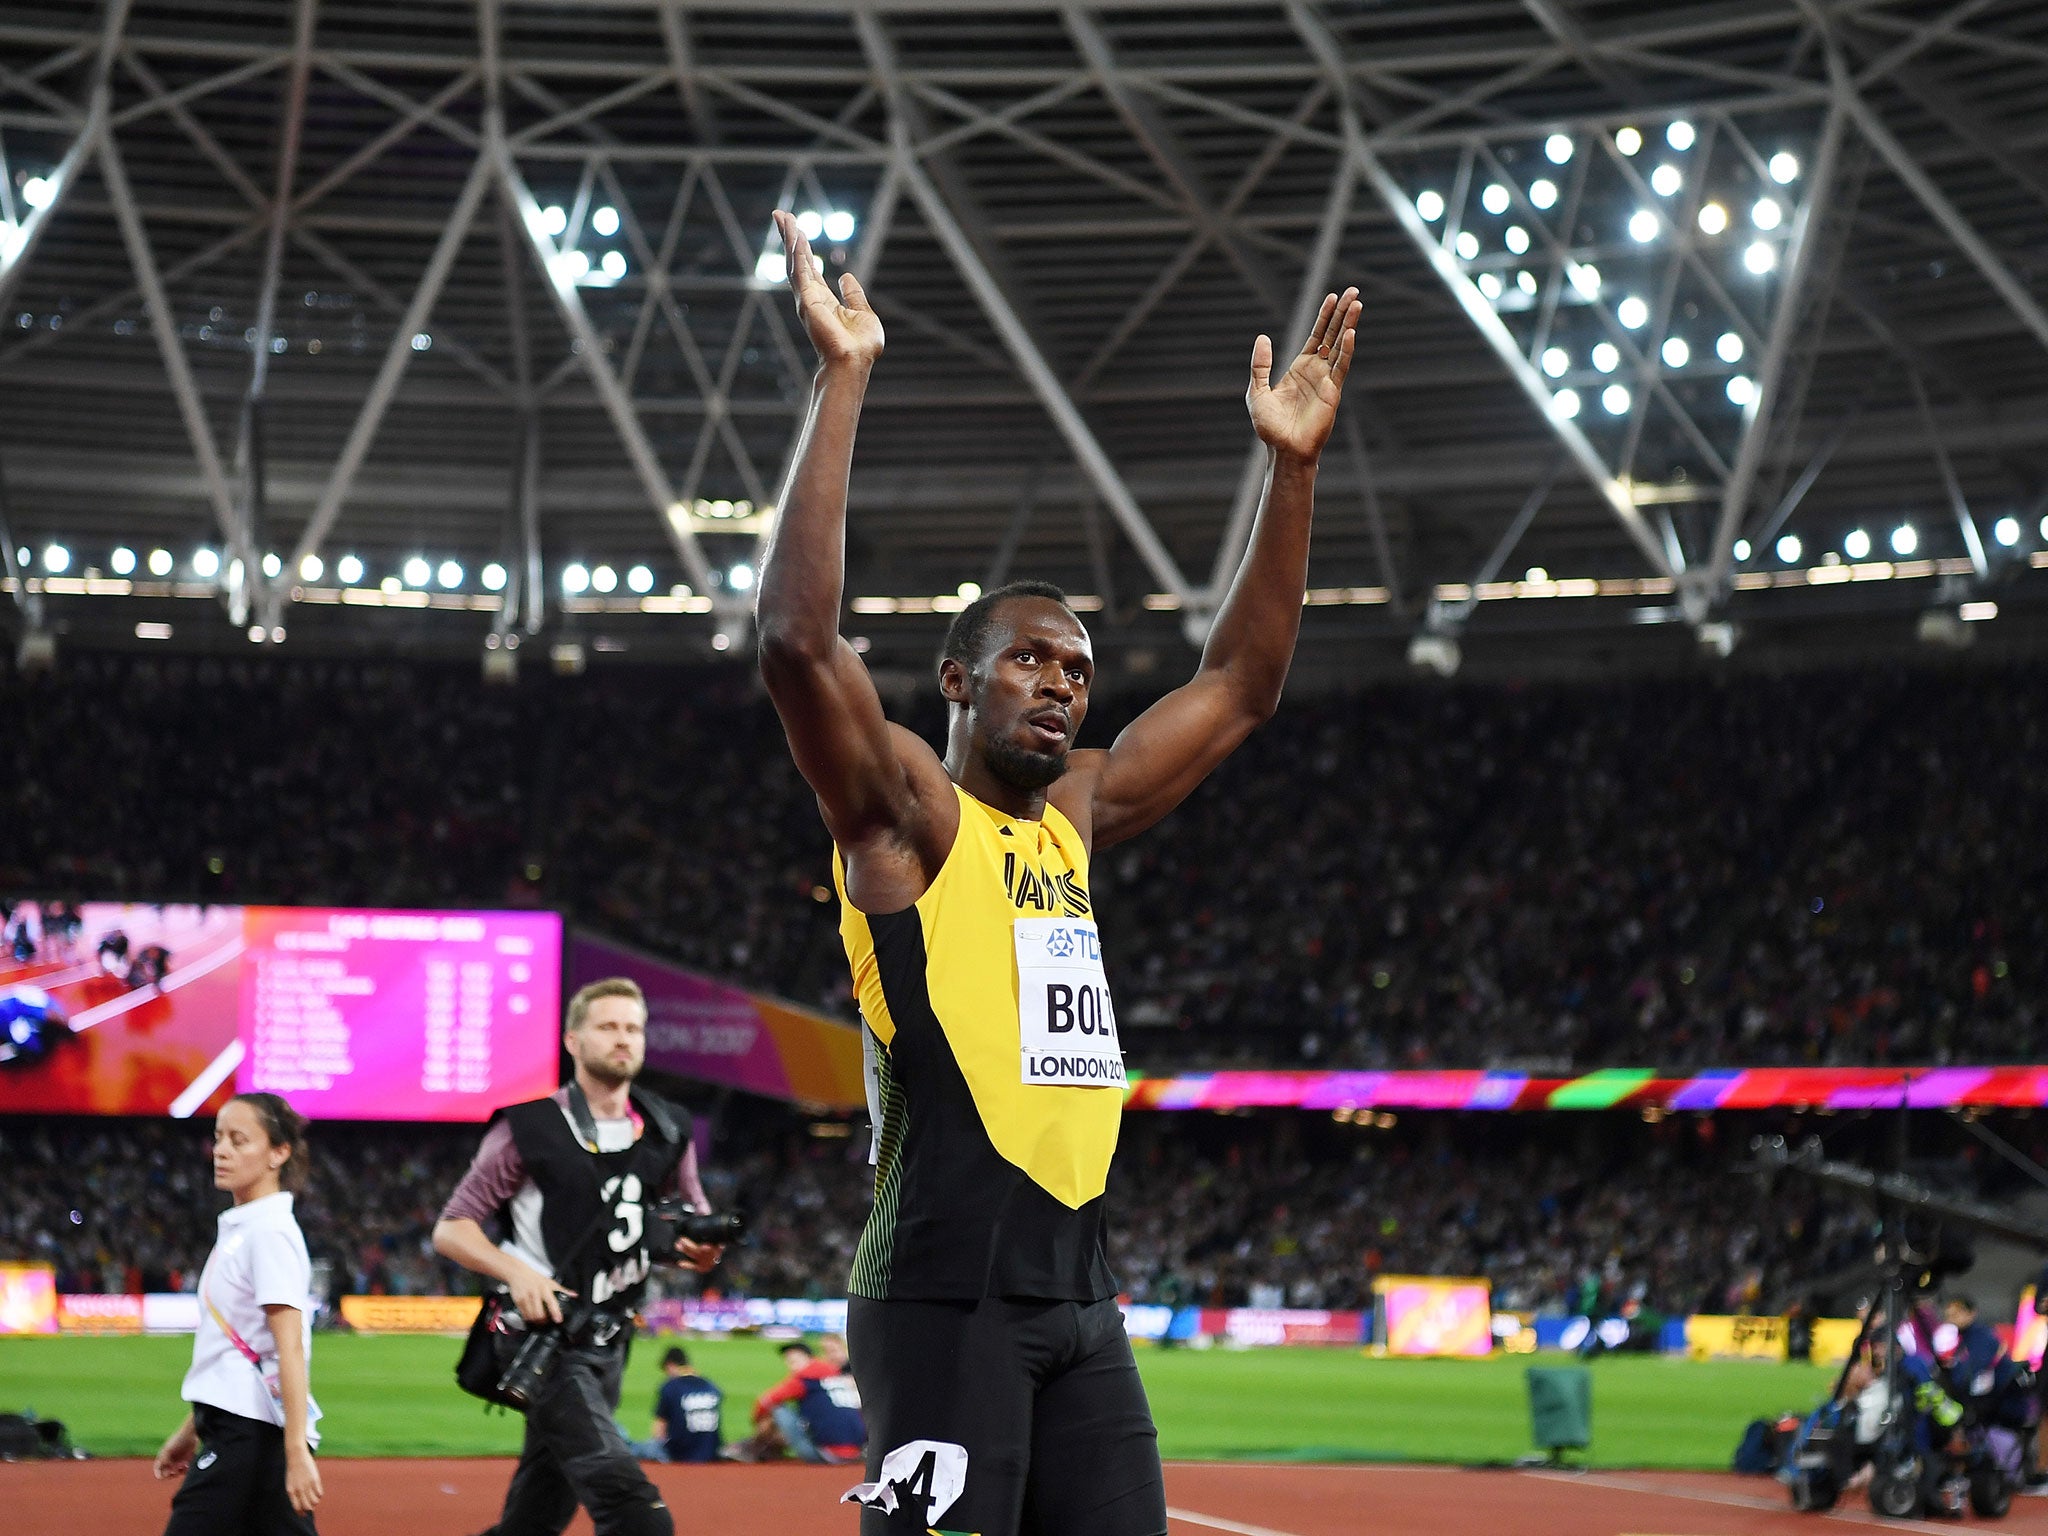 Usain Bolt was unable to end his solo career on a high